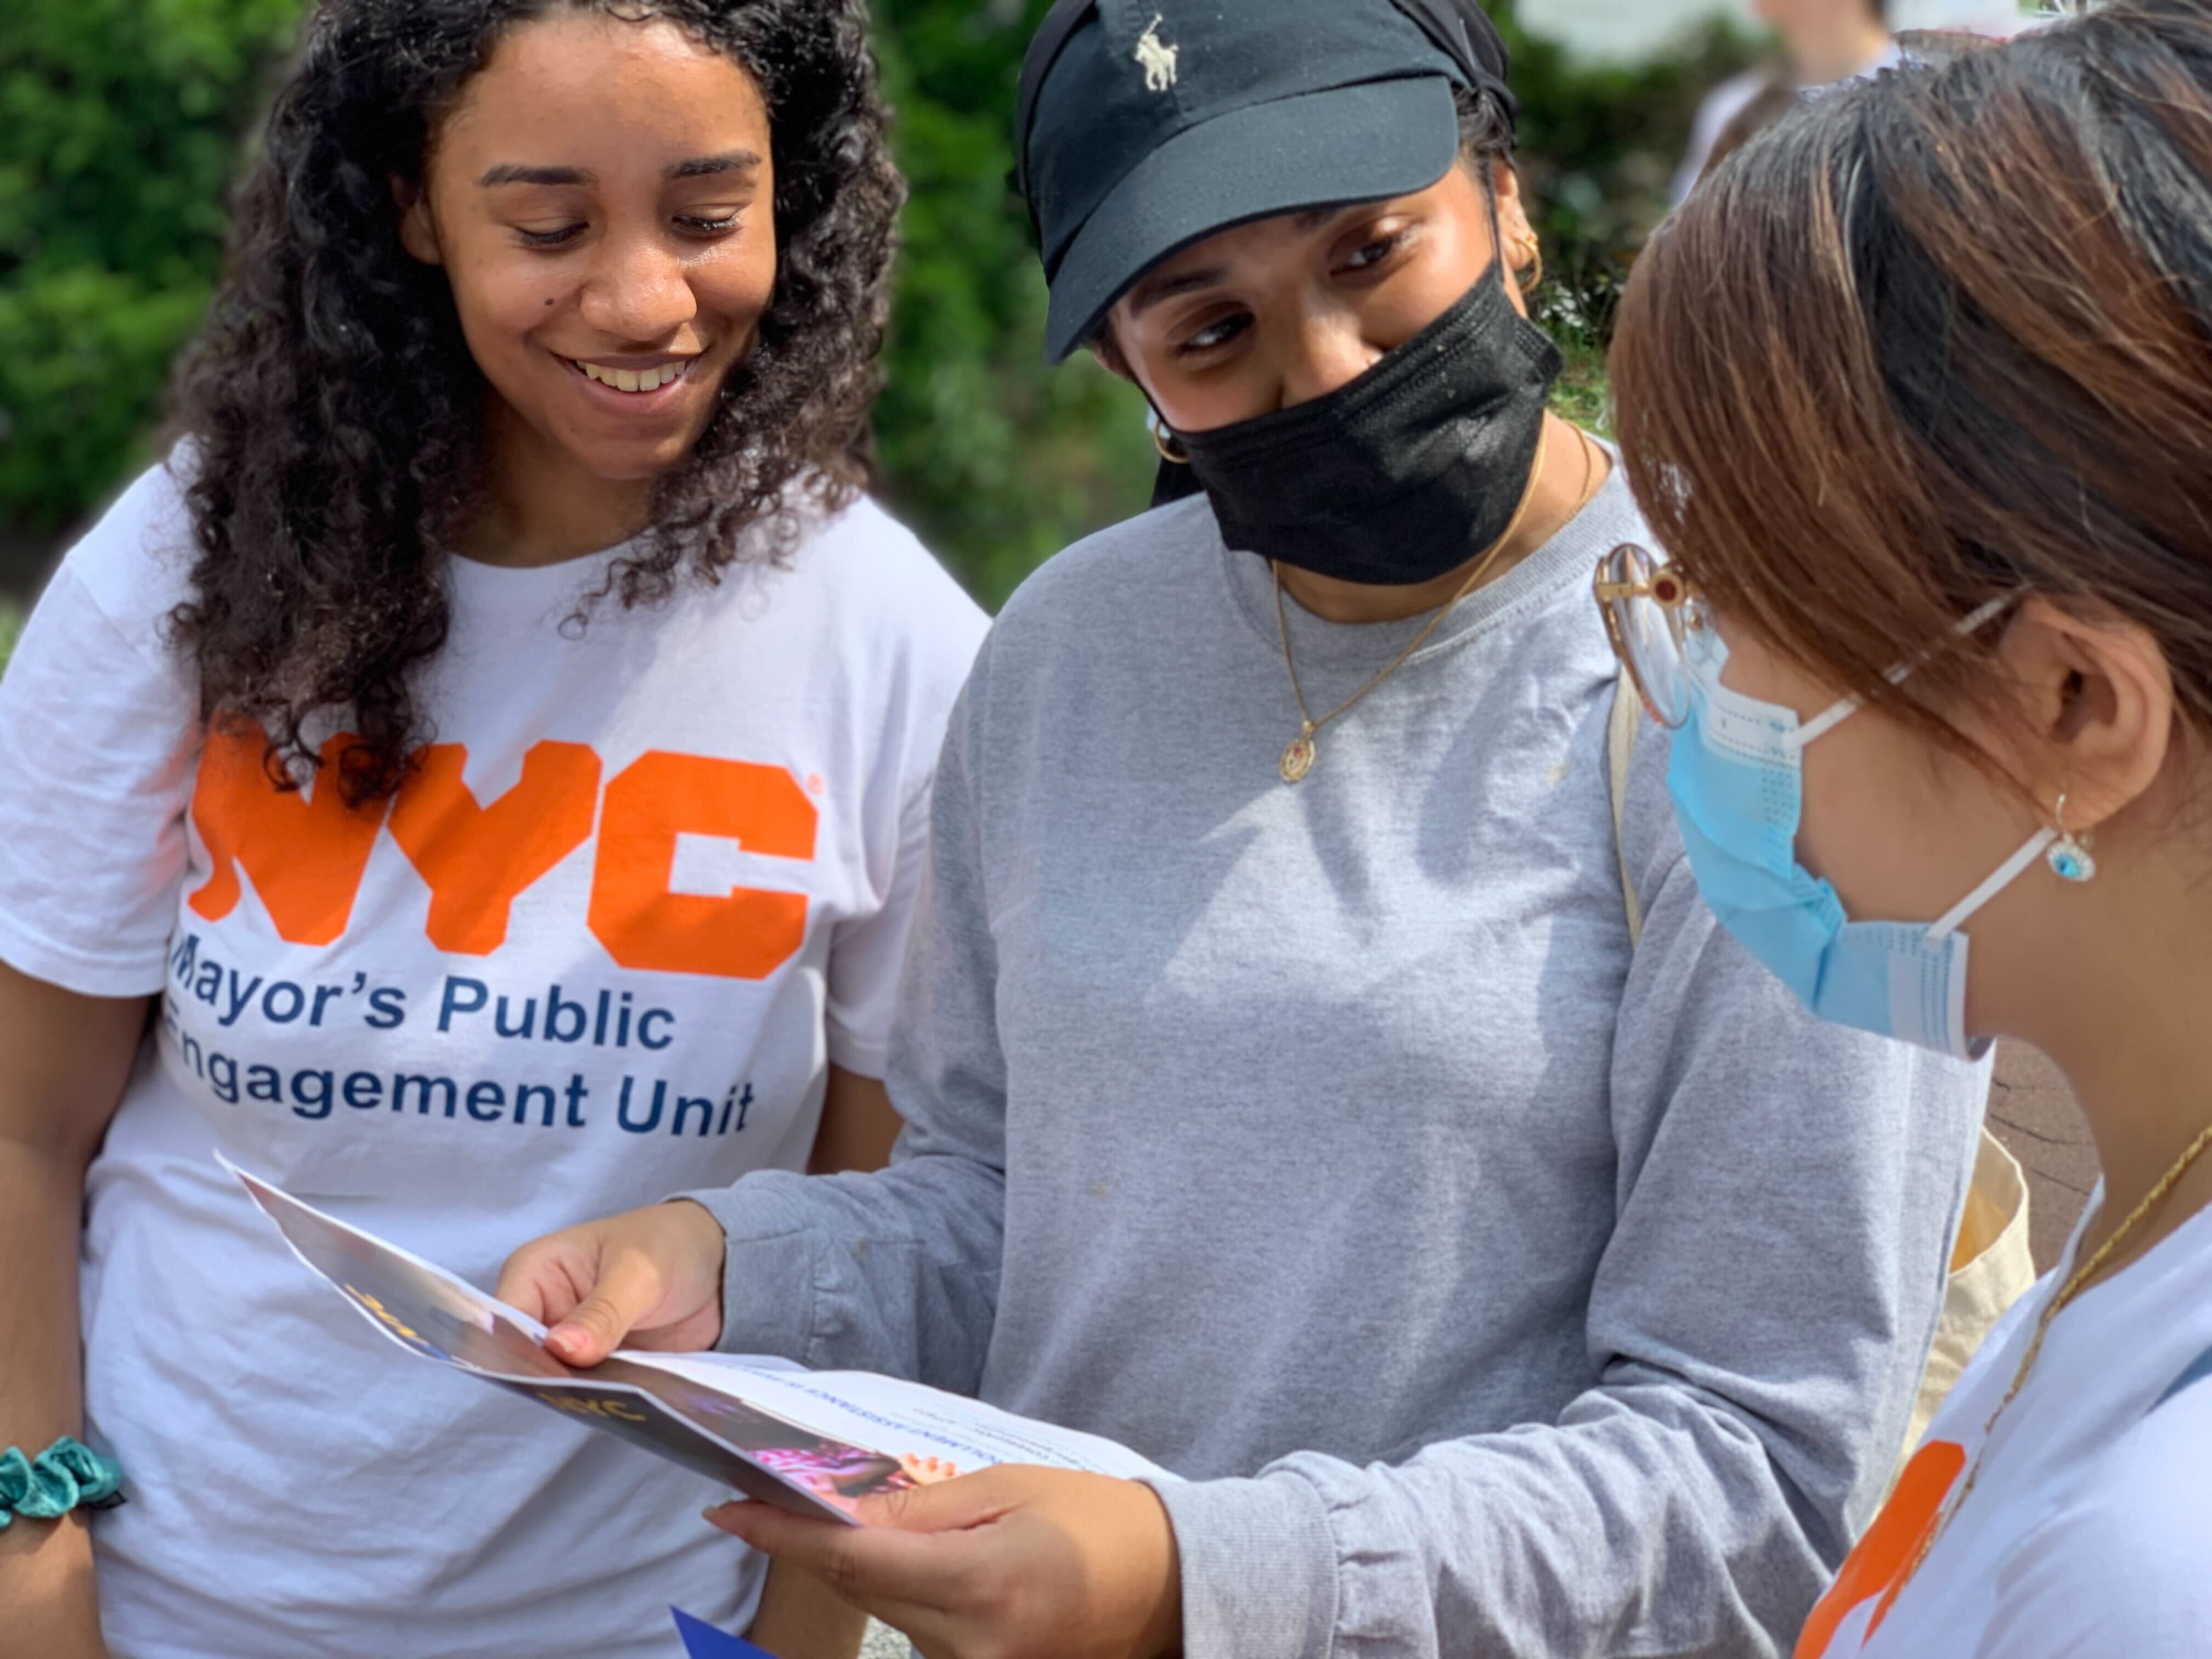 Two CUNY interns wearing PEU T-shirts talk to a woman wearing a hat about a flyer she was given. 